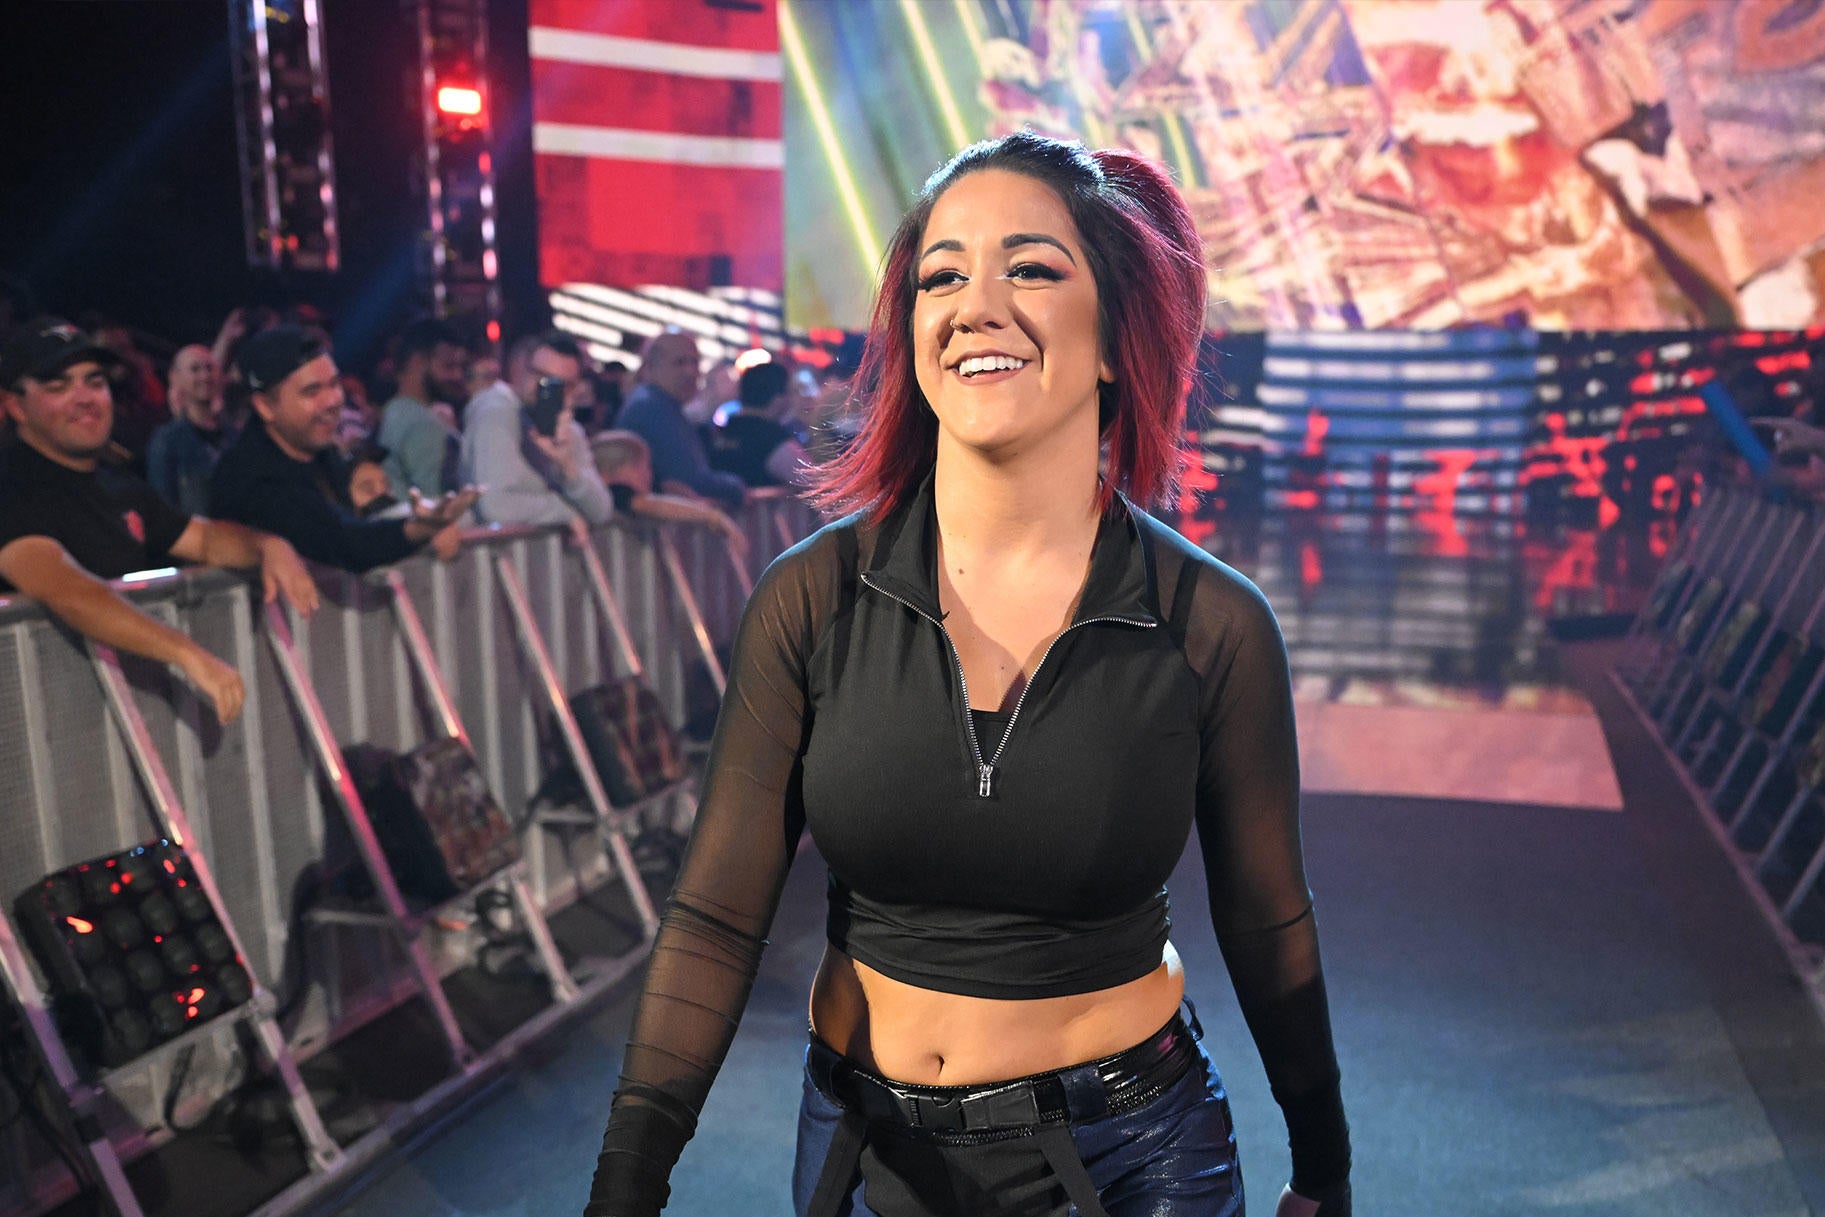 Is a New Bayley Shirt Design Hinting at a Paramore WrestleMania Performance?